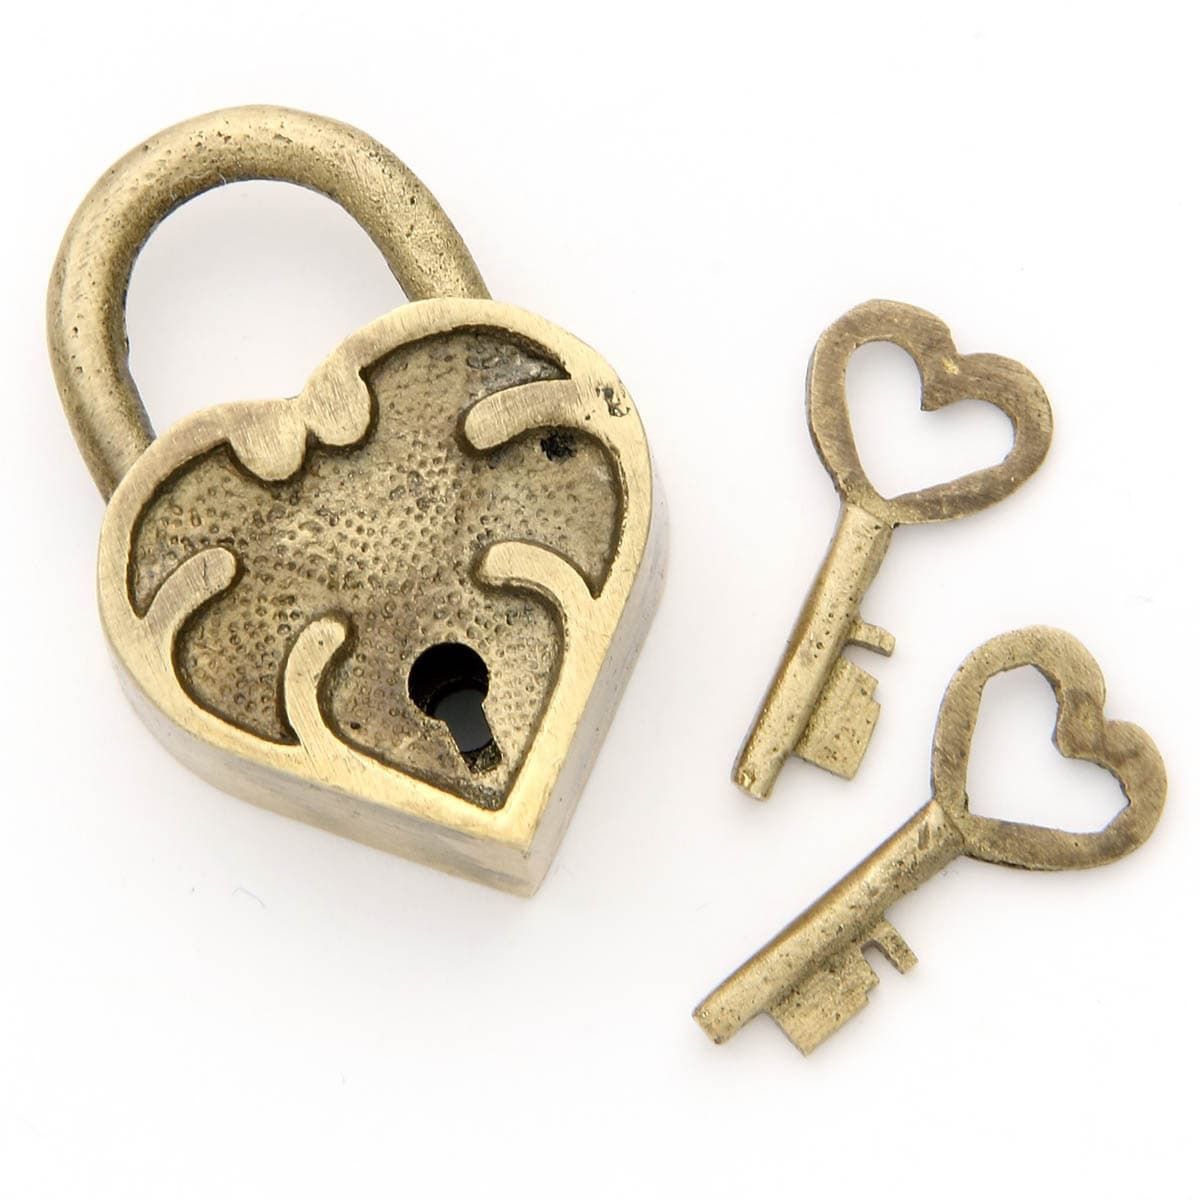 Made from an original 1800's lock, this solid brass working lock is heart shaped and includes 2 keys